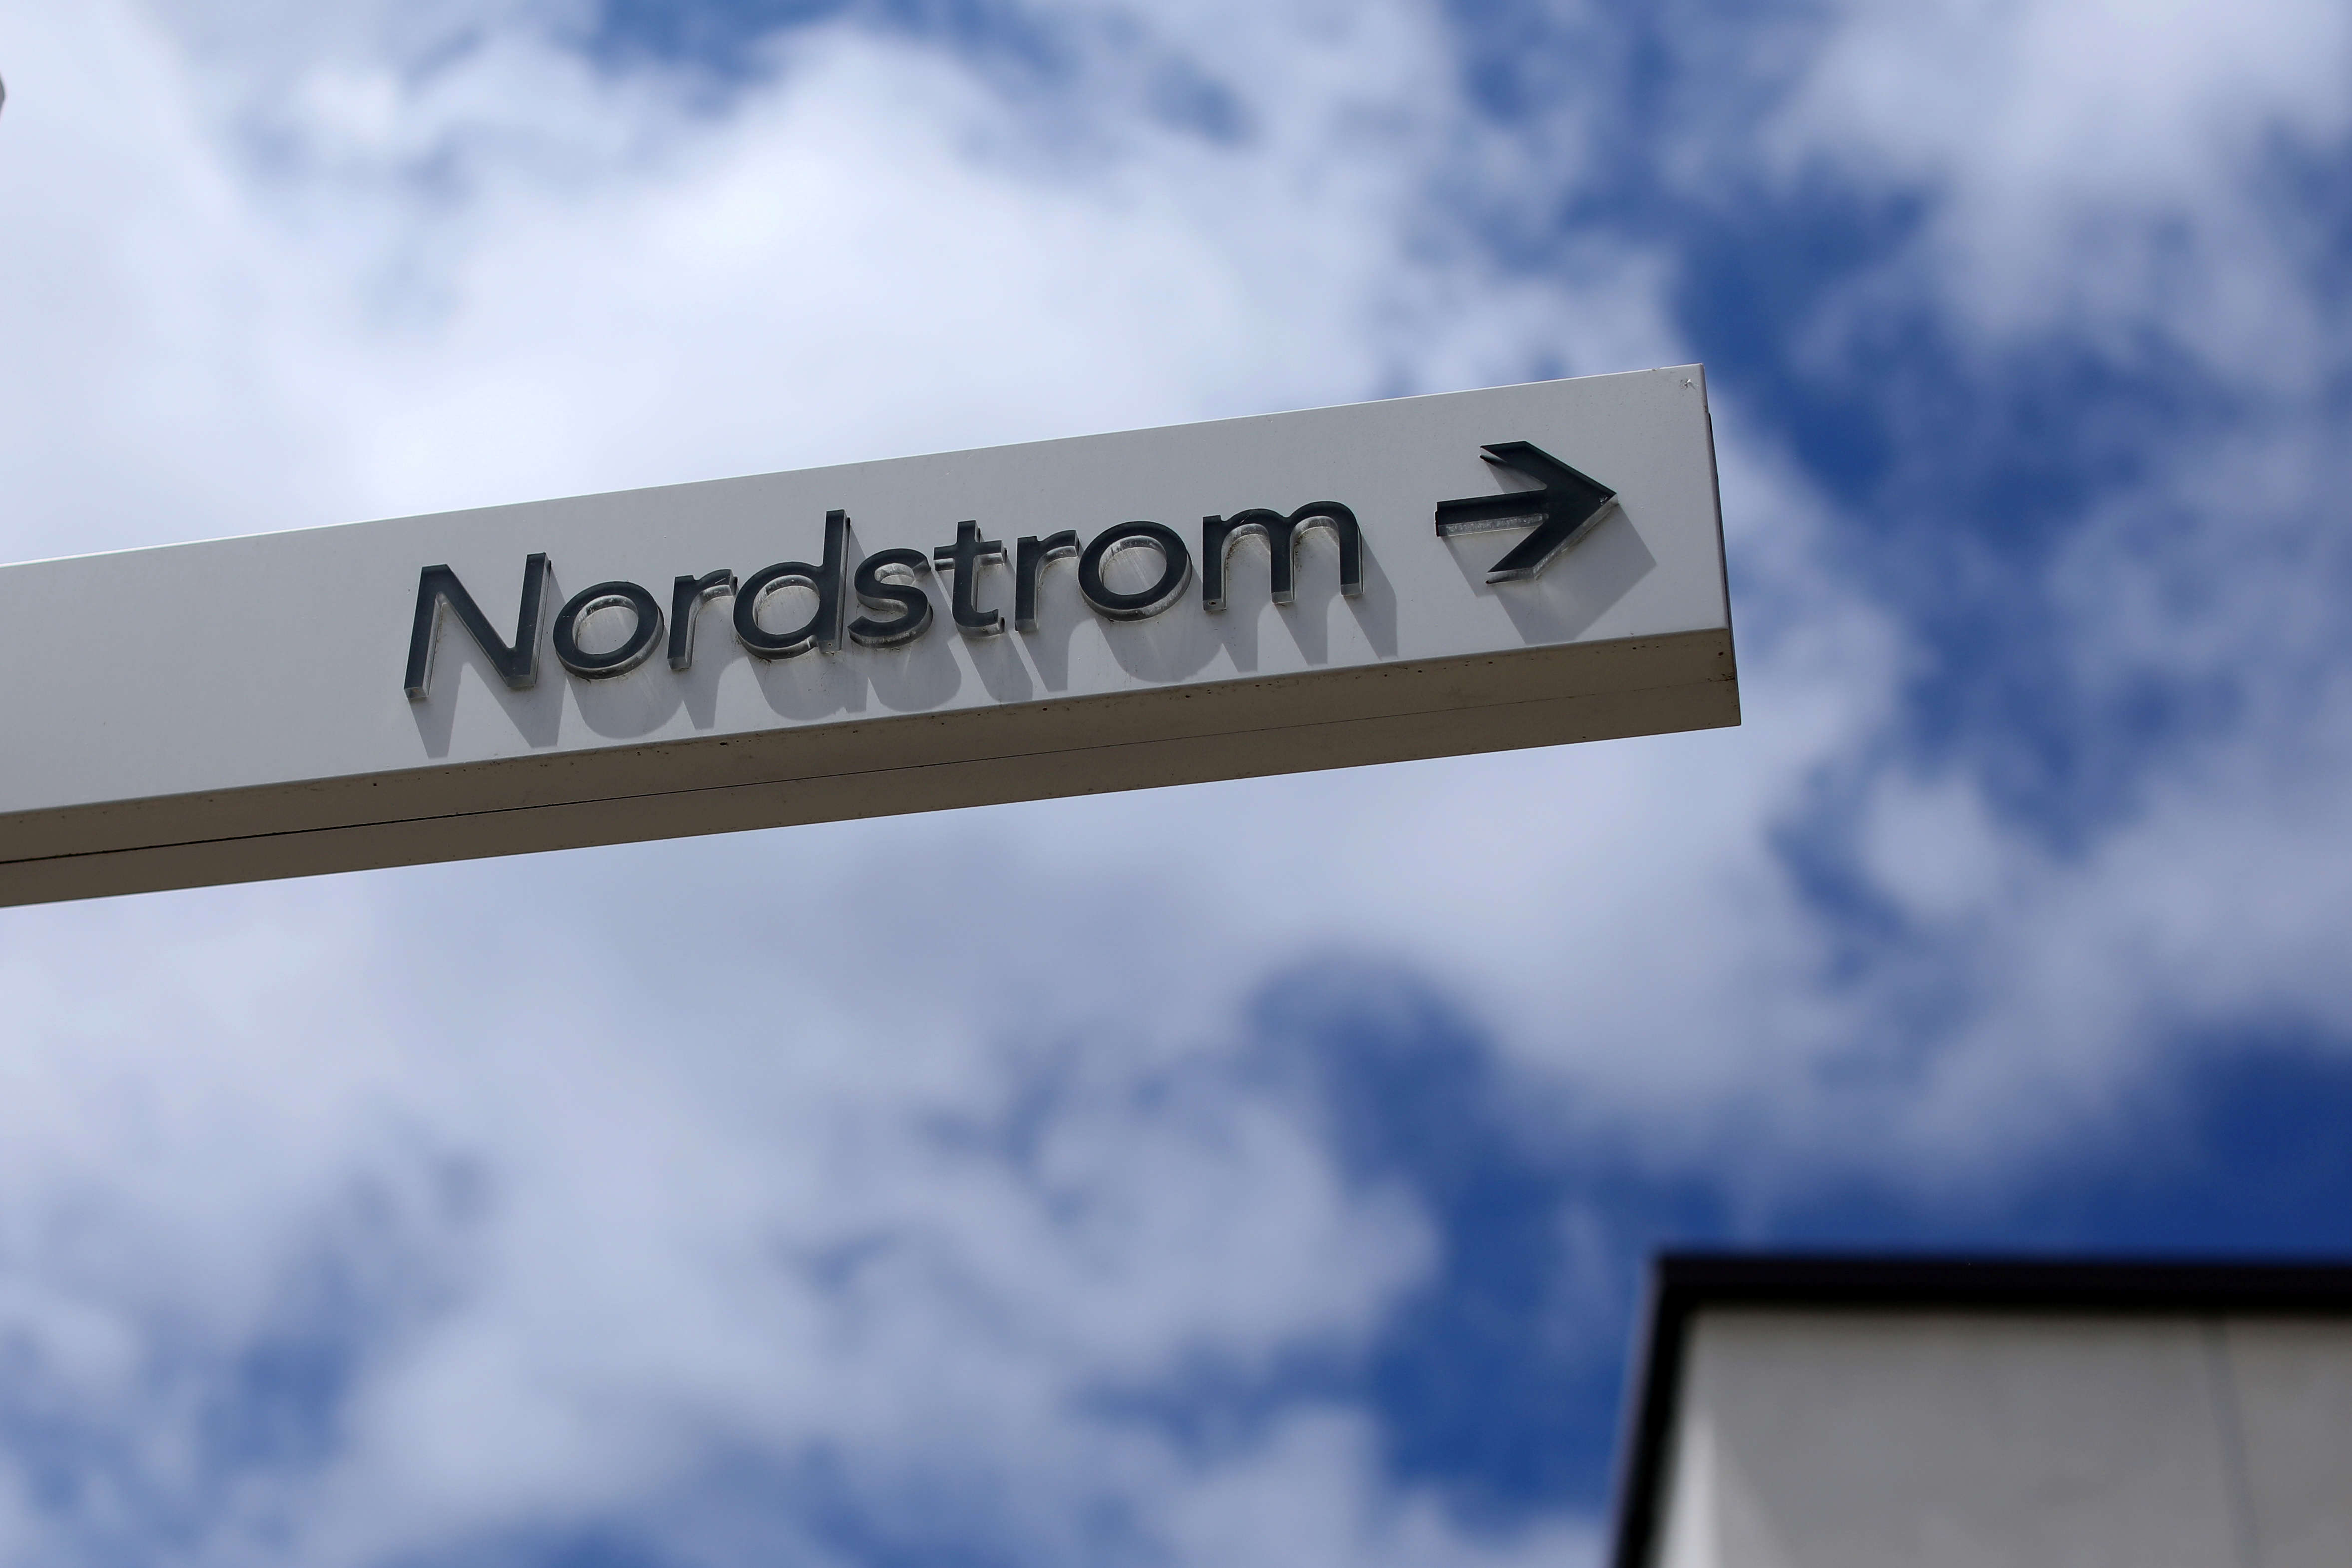 A sign directs shoppers to a Nordstrom store at a shopping mall in La Jolla